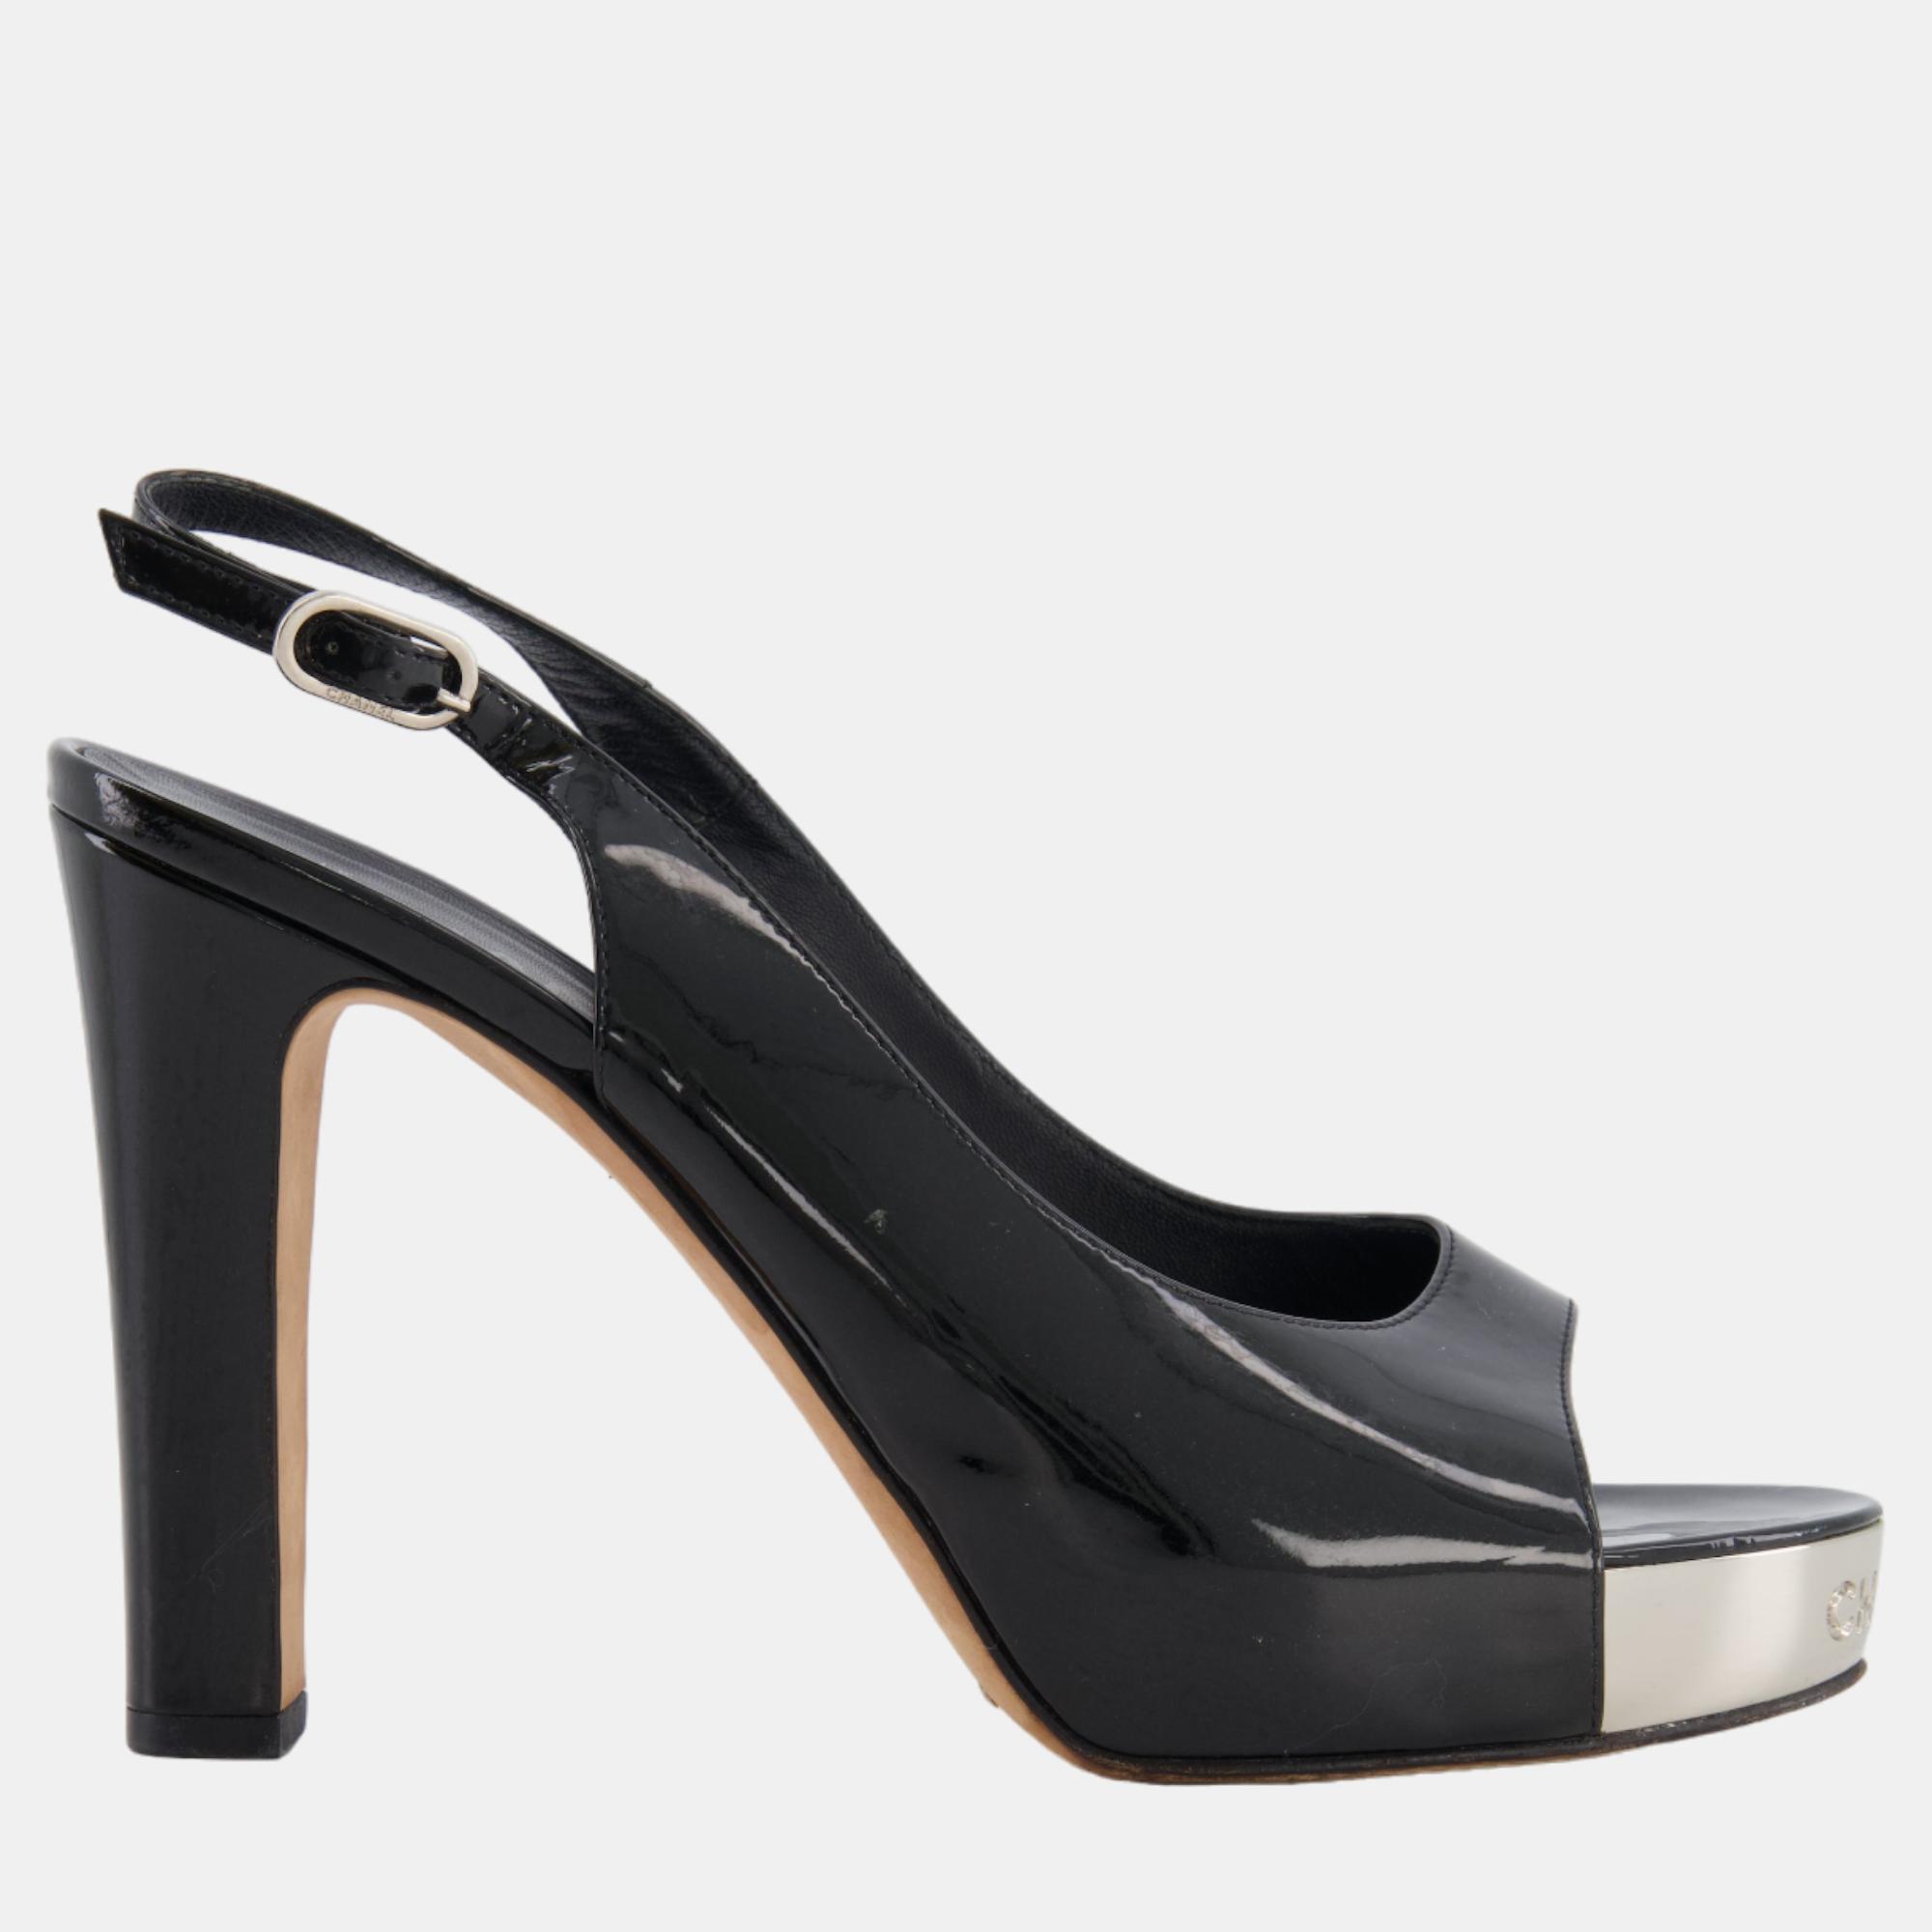 

Chanel Black Patent Leather Pumps with Silver Logo Detail Size EU